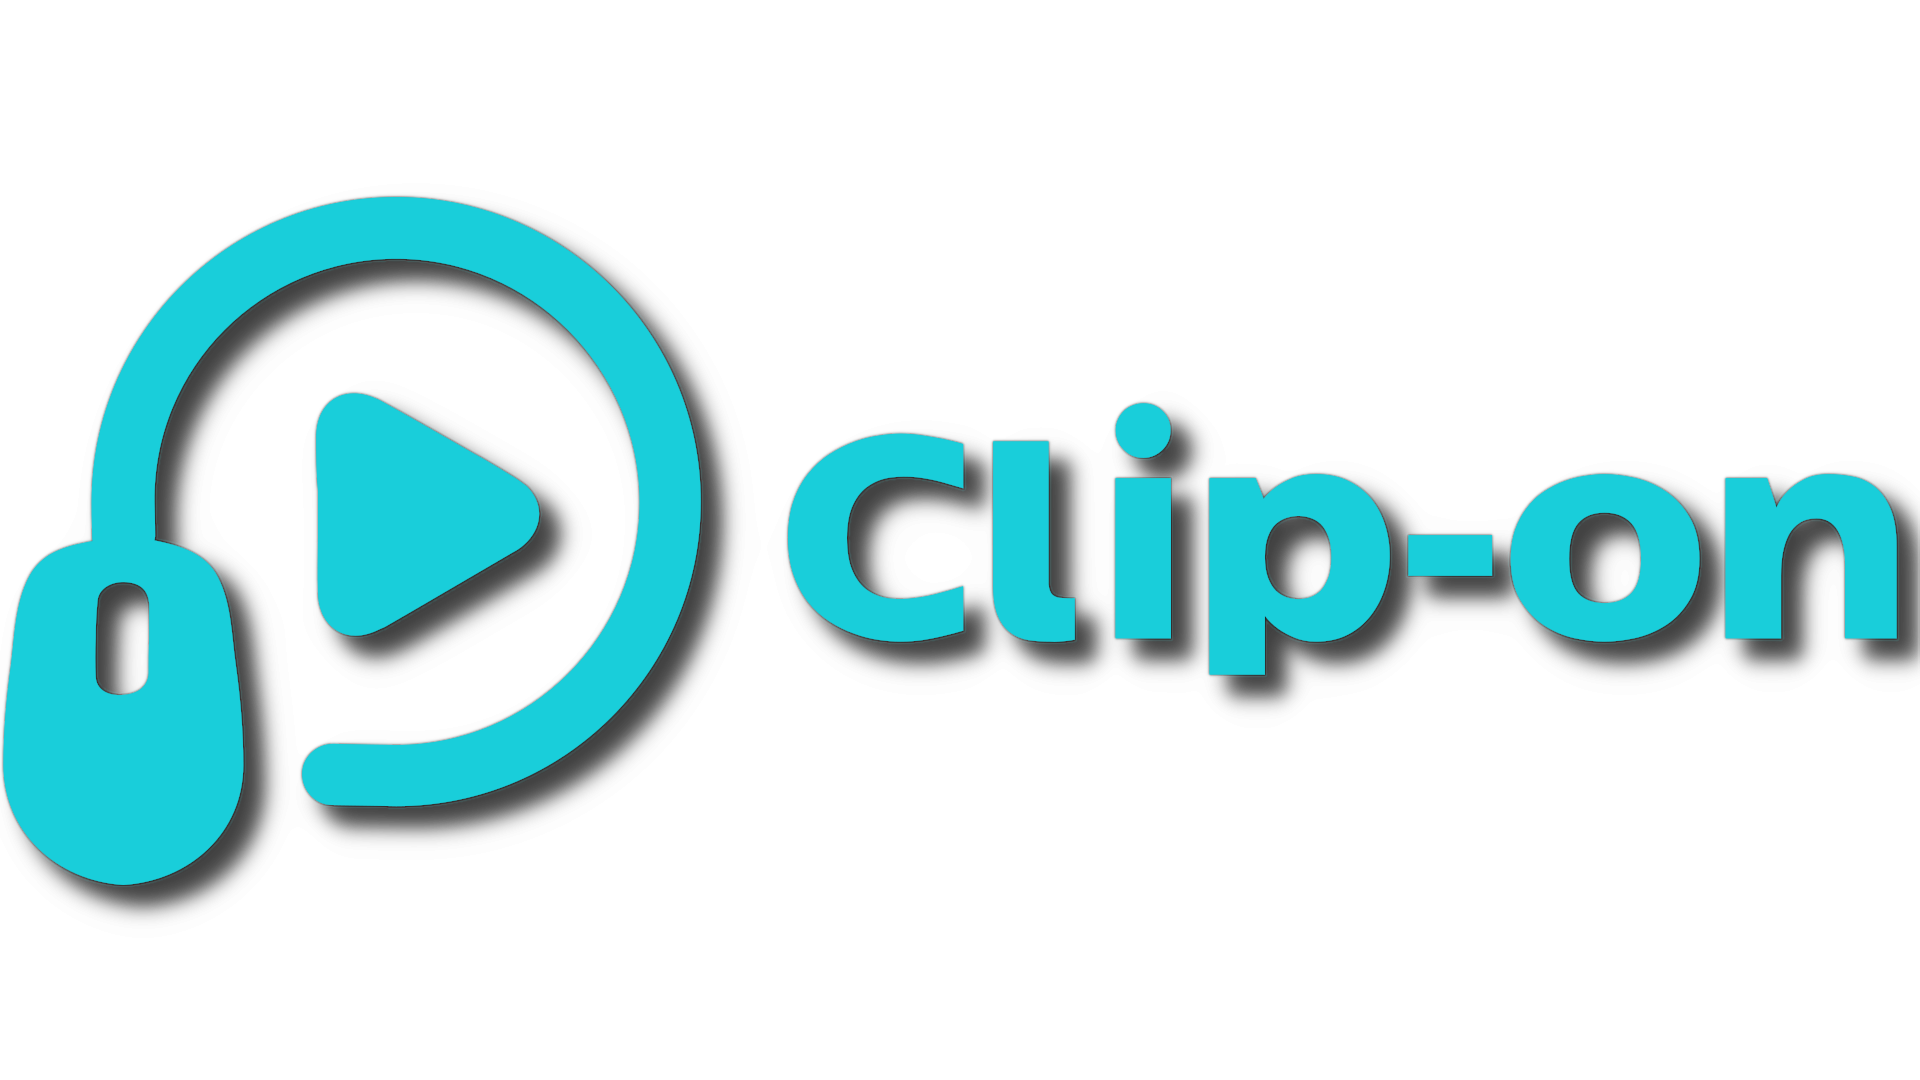 Clip-on Limited logo